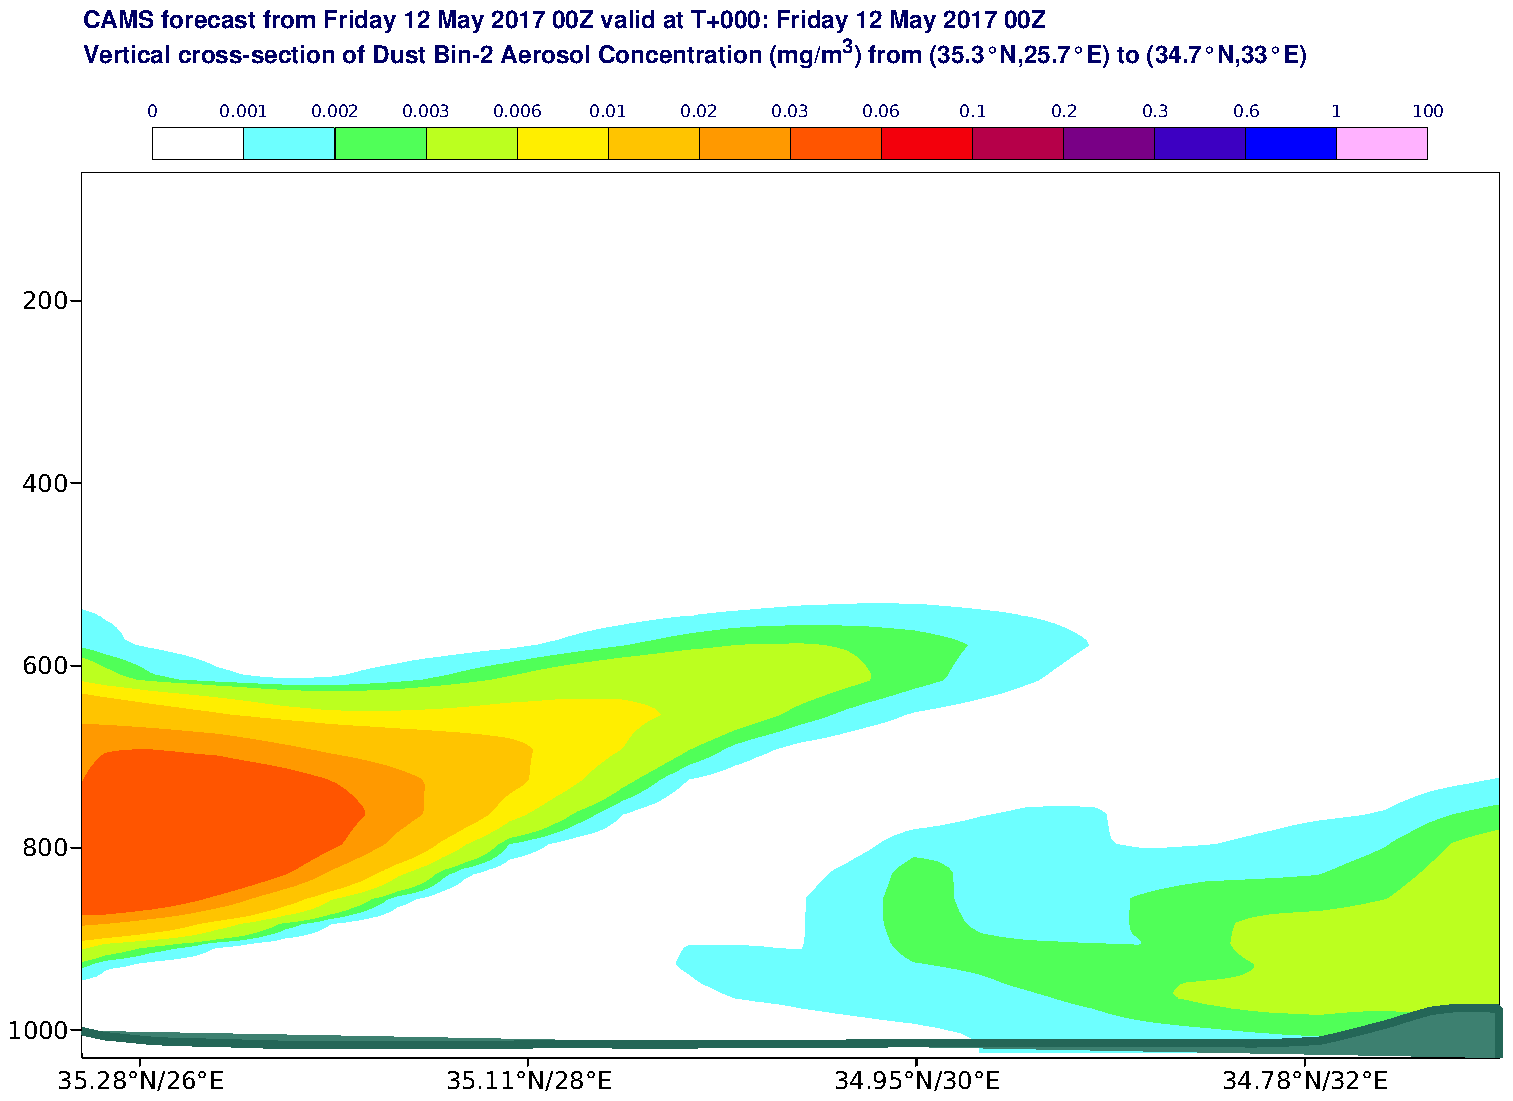 Vertical cross-section of Dust Bin-2 Aerosol Concentration (mg/m3) valid at T0 - 2017-05-12 00:00